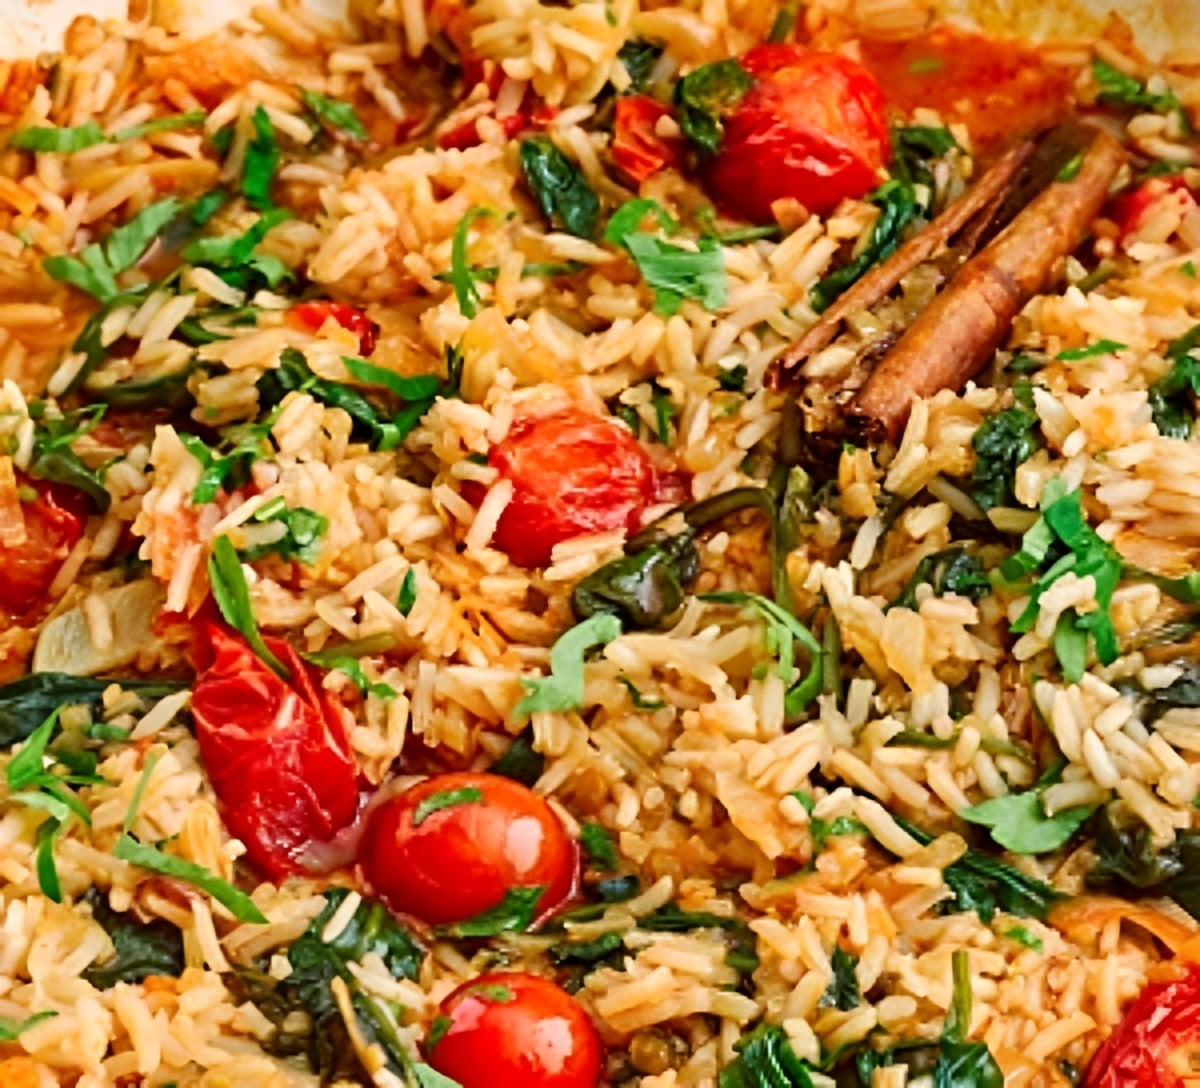 Healthy lemon, spinach, and tomato pilaf.